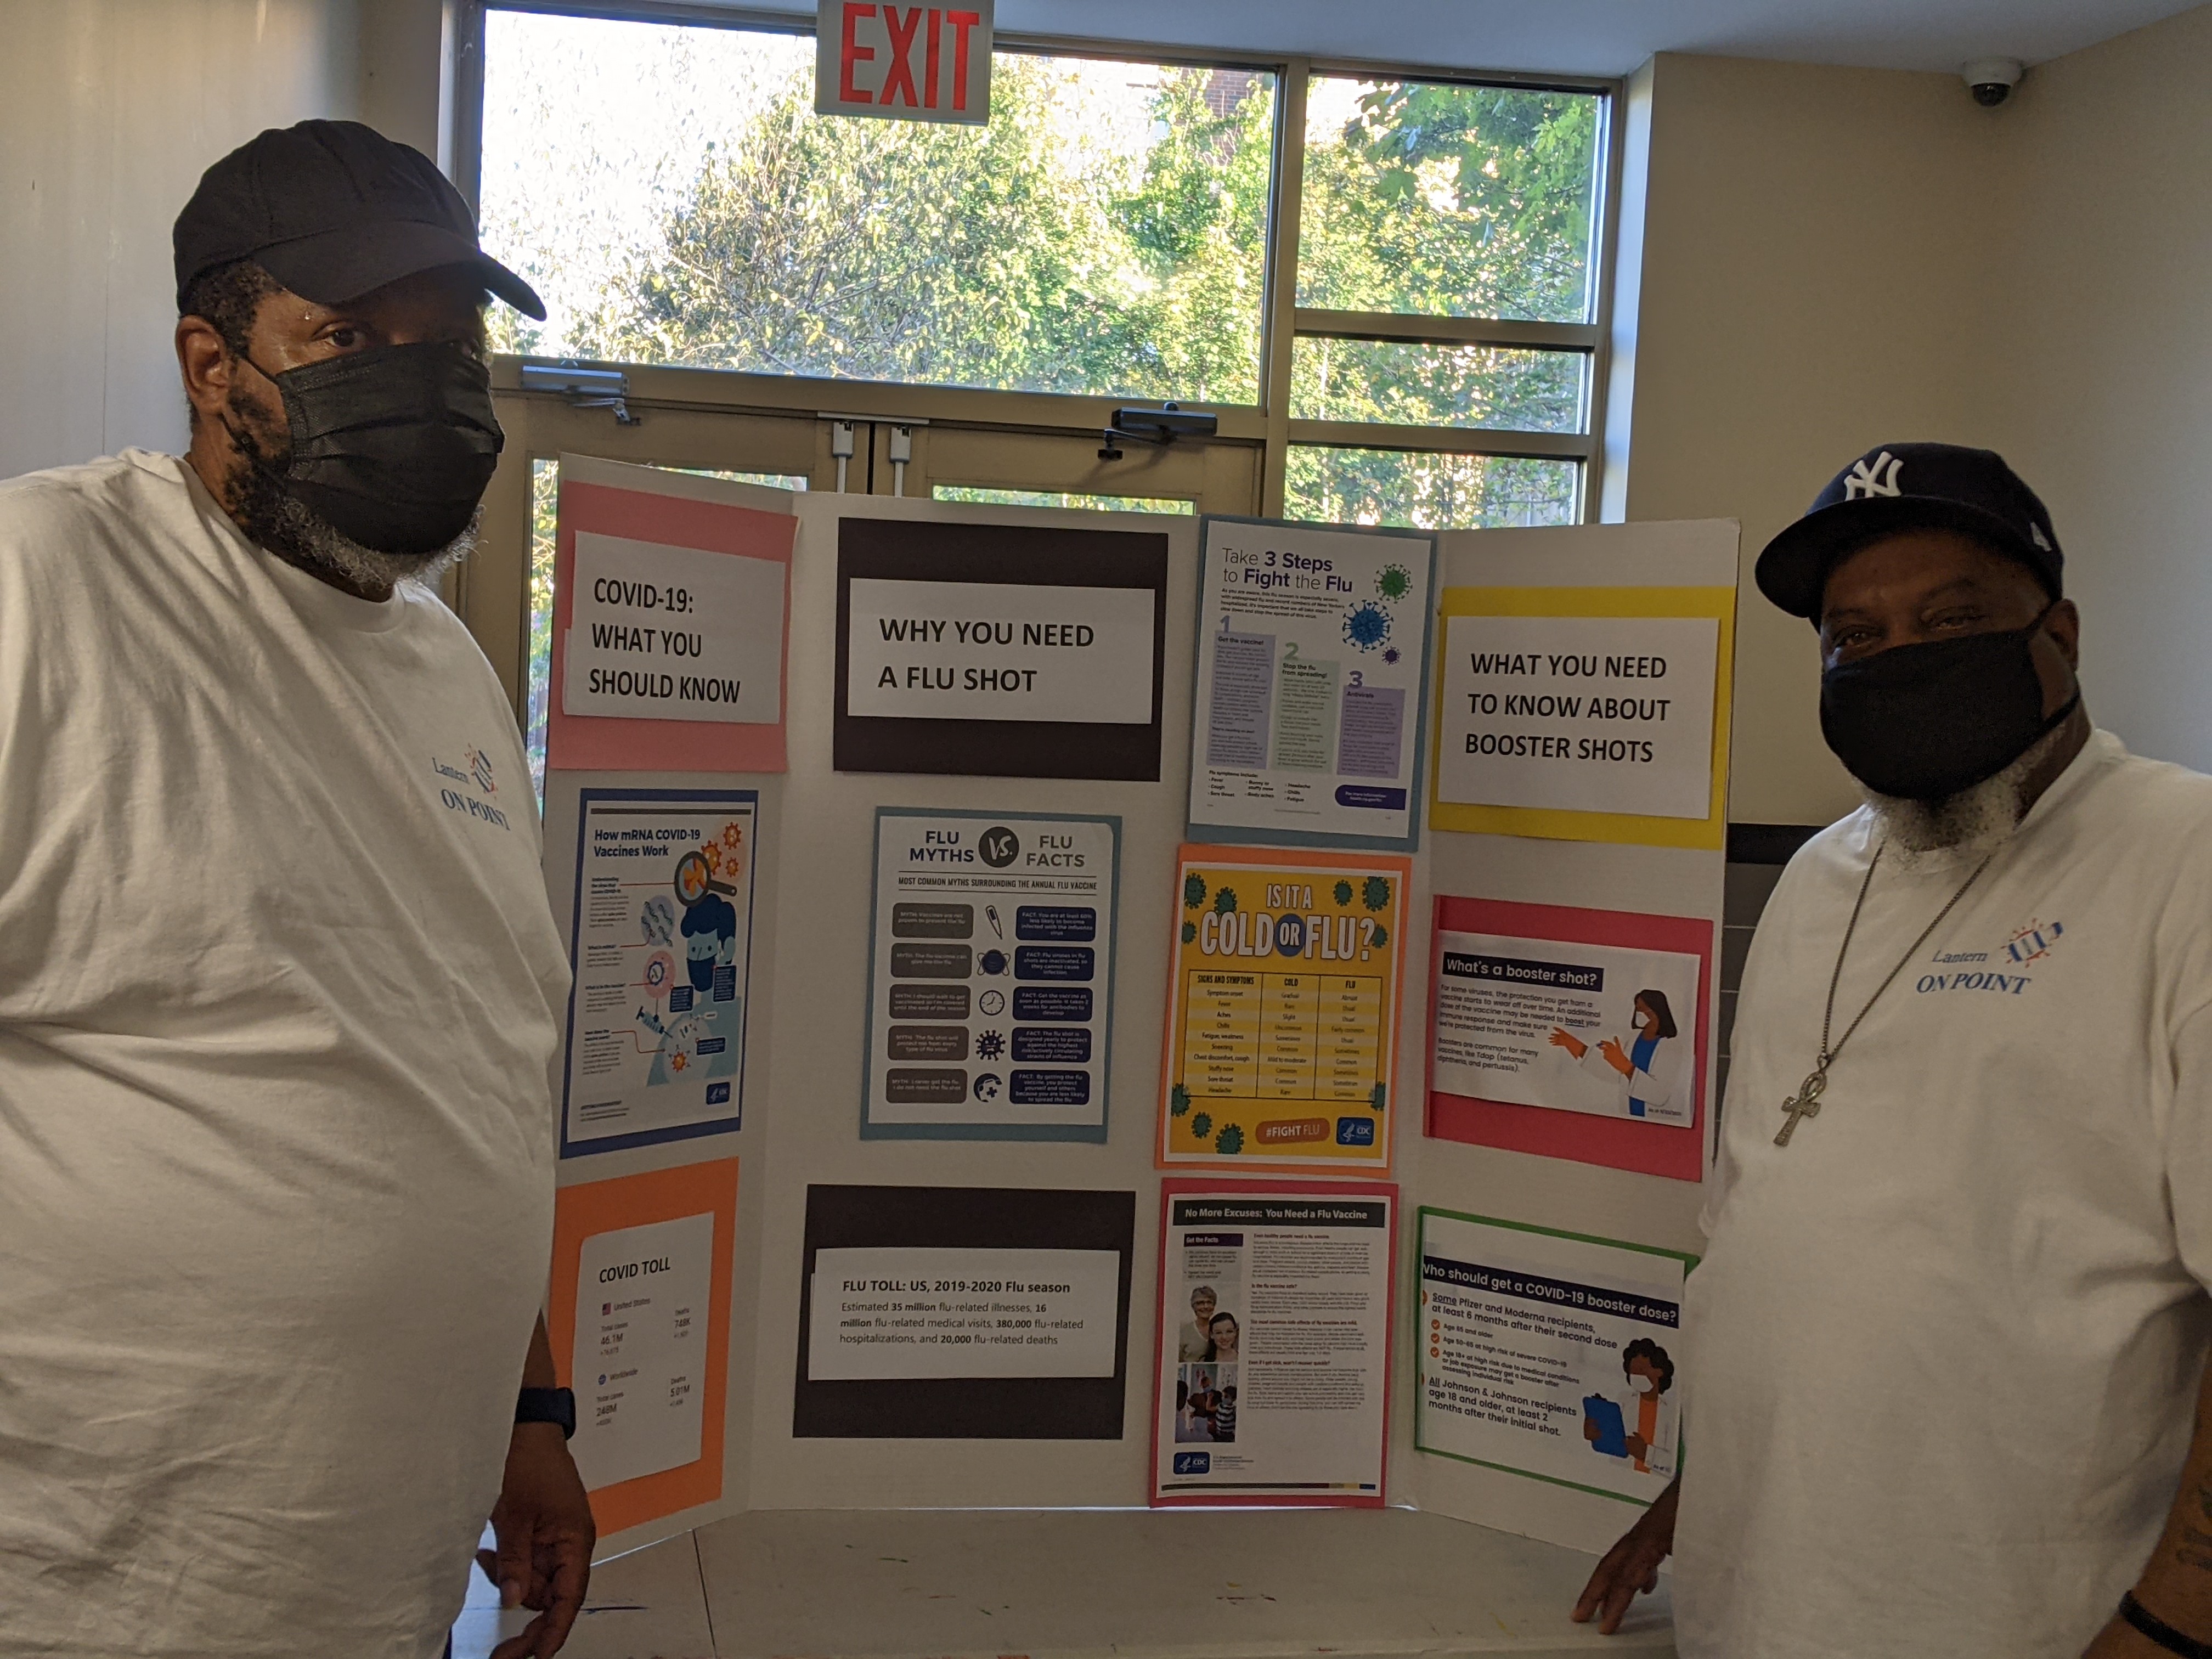 Lantern Community Services staff members stand in front of an informational poster